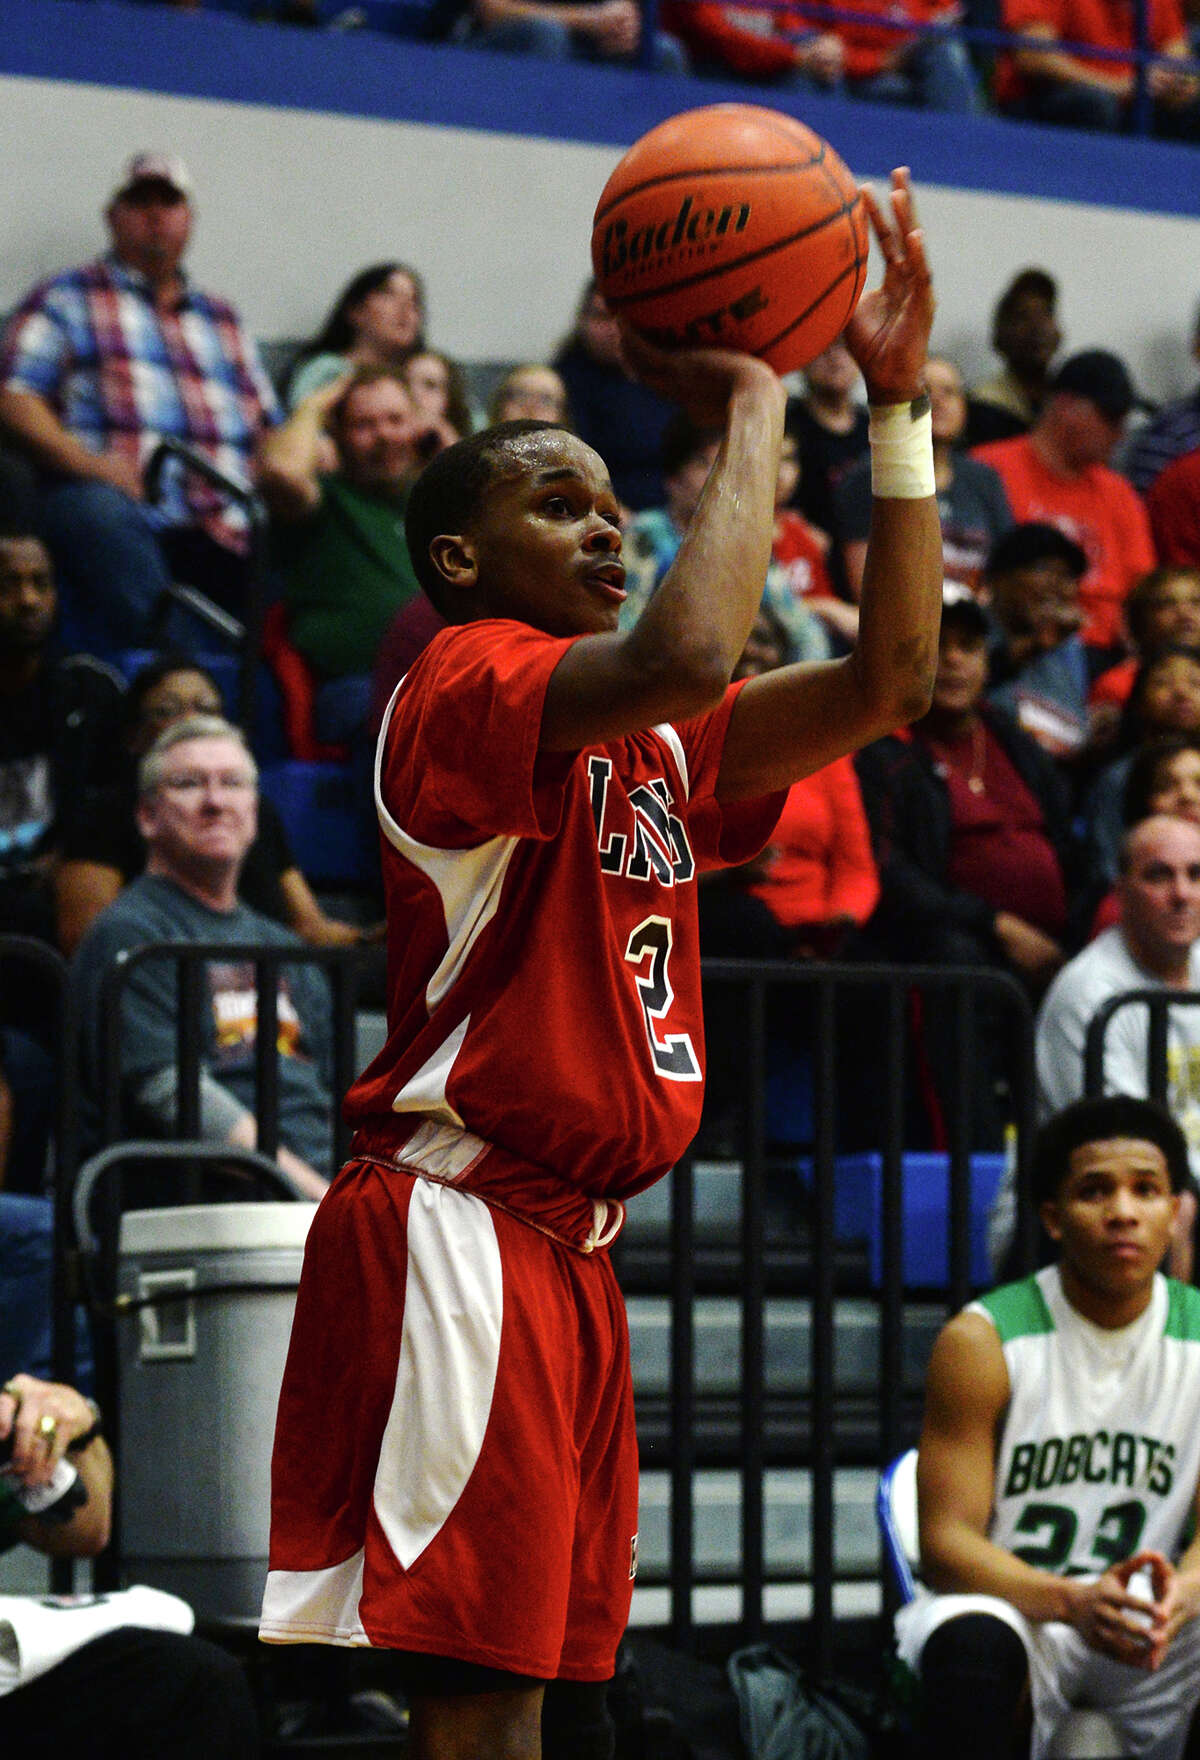 Stanford's 3-point shooting bolsters Kountze's offense